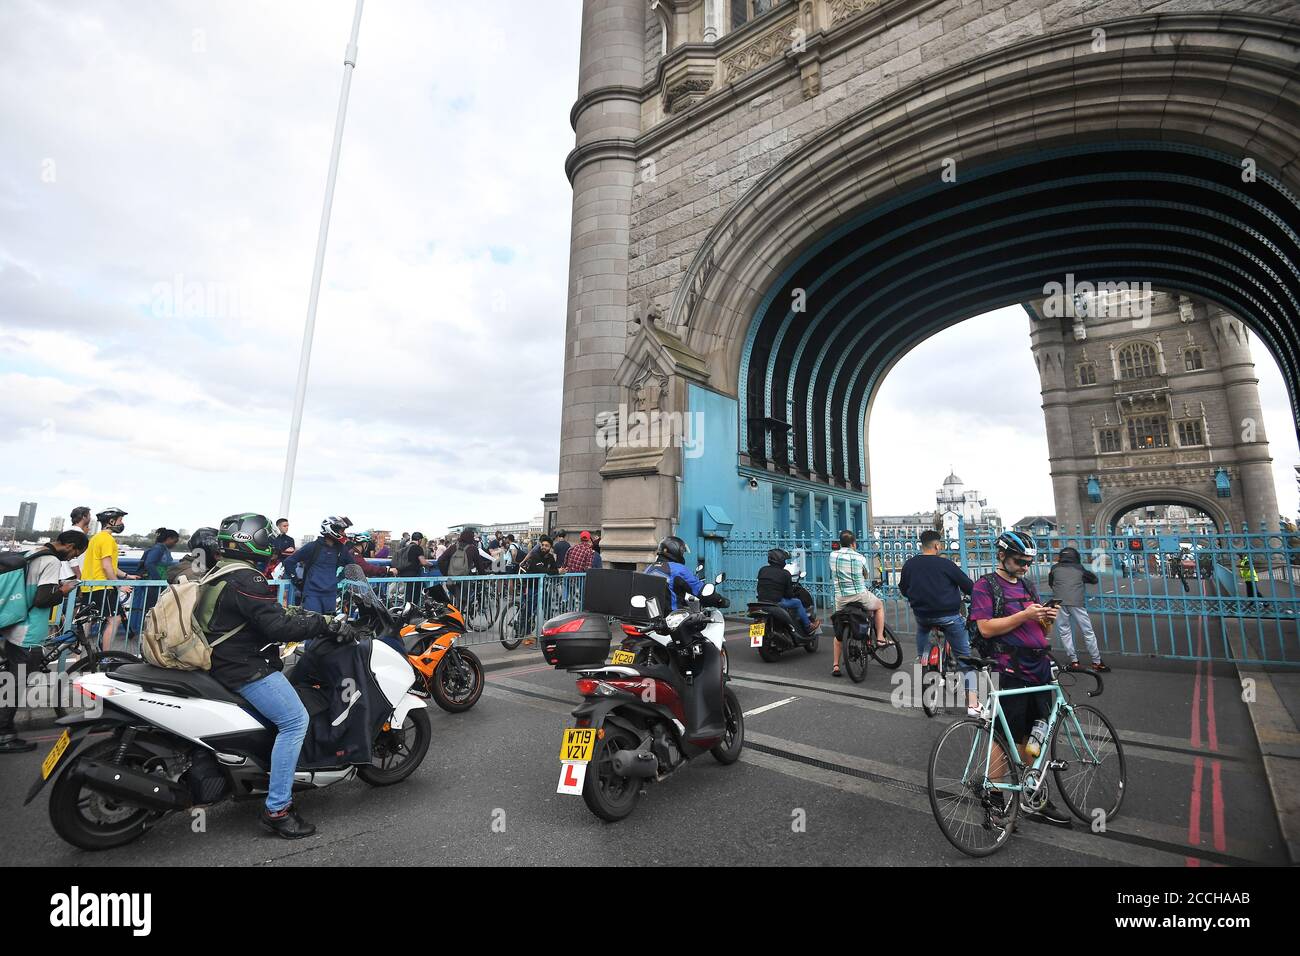 Traffic and pedestrians waiting on the approach to Tower Bridge in London, after the bridge became stuck open, causing traffic chaos. Stock Photo